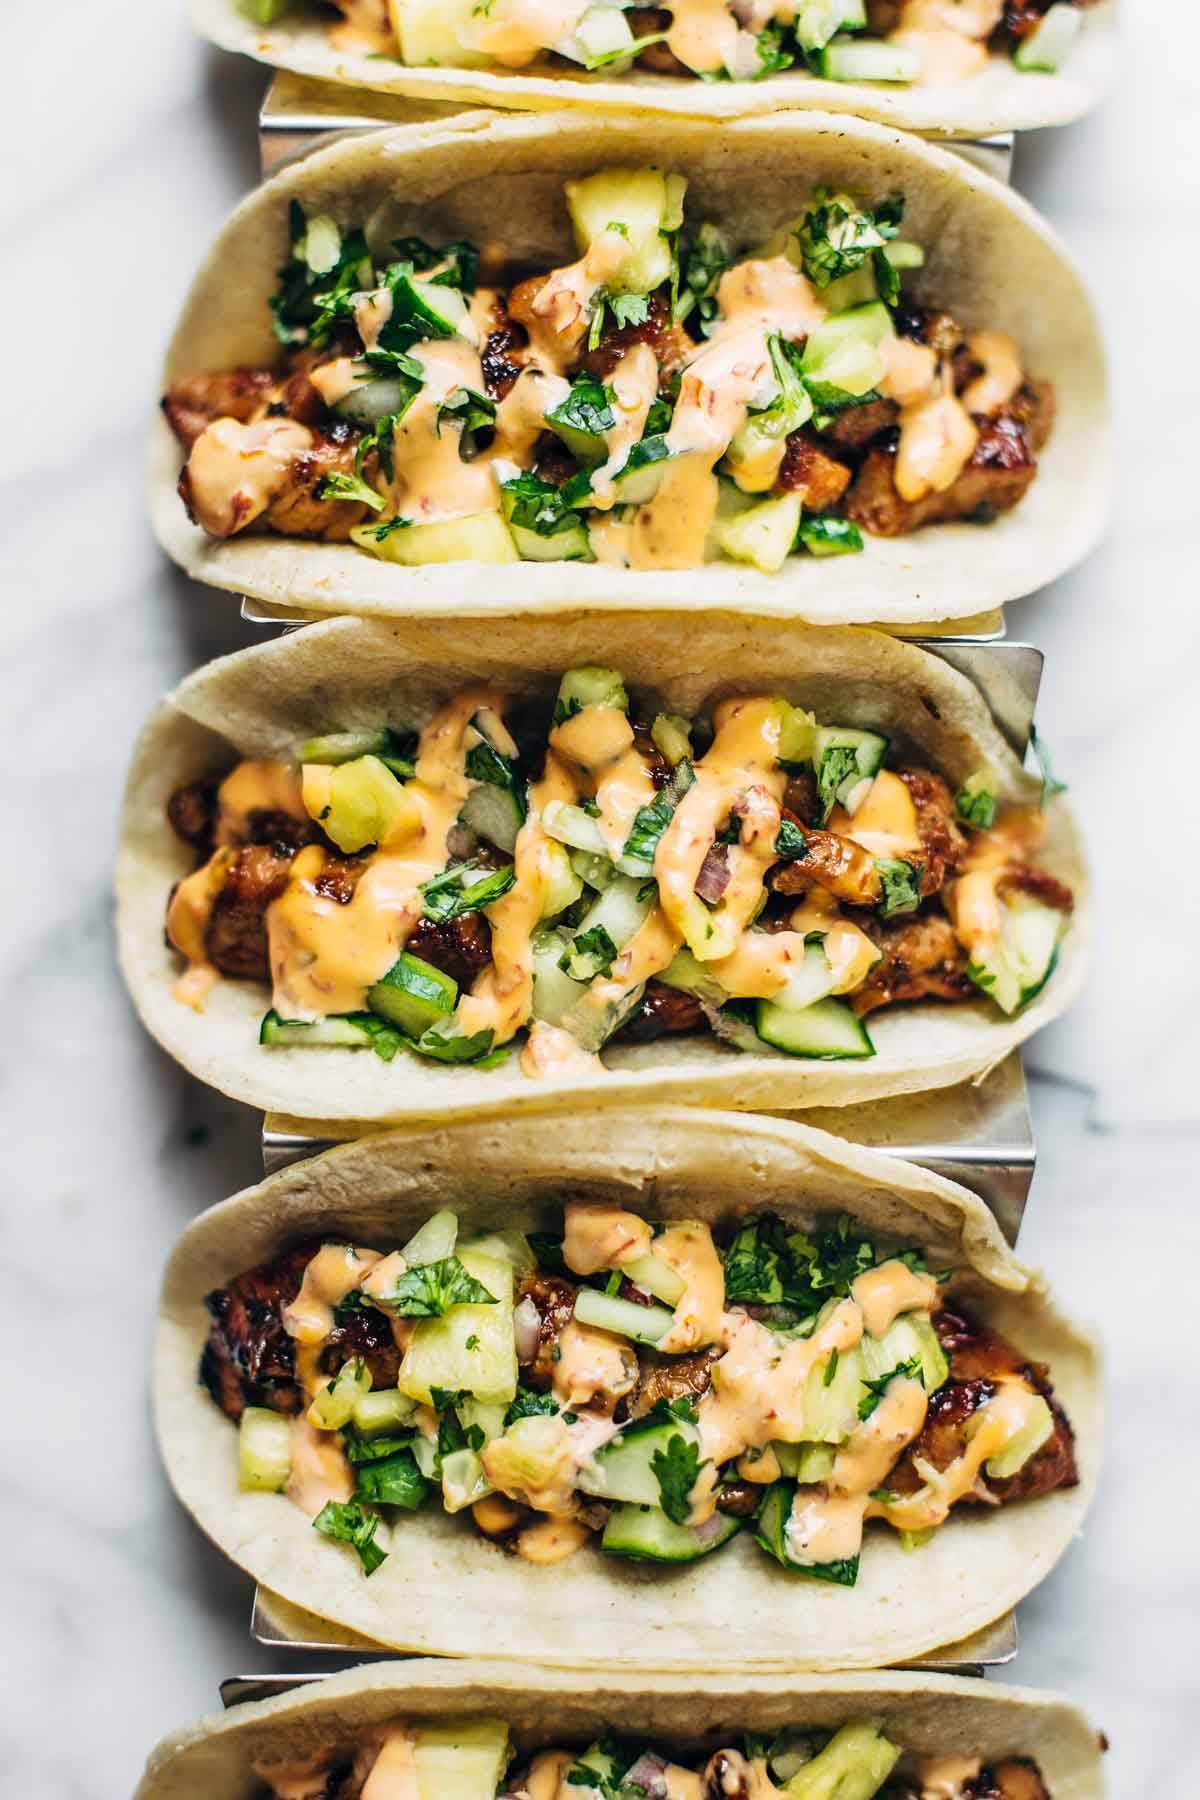 Caramelized Pork Tacos with Pineapple Salsa Recipe - Pinch of Yum